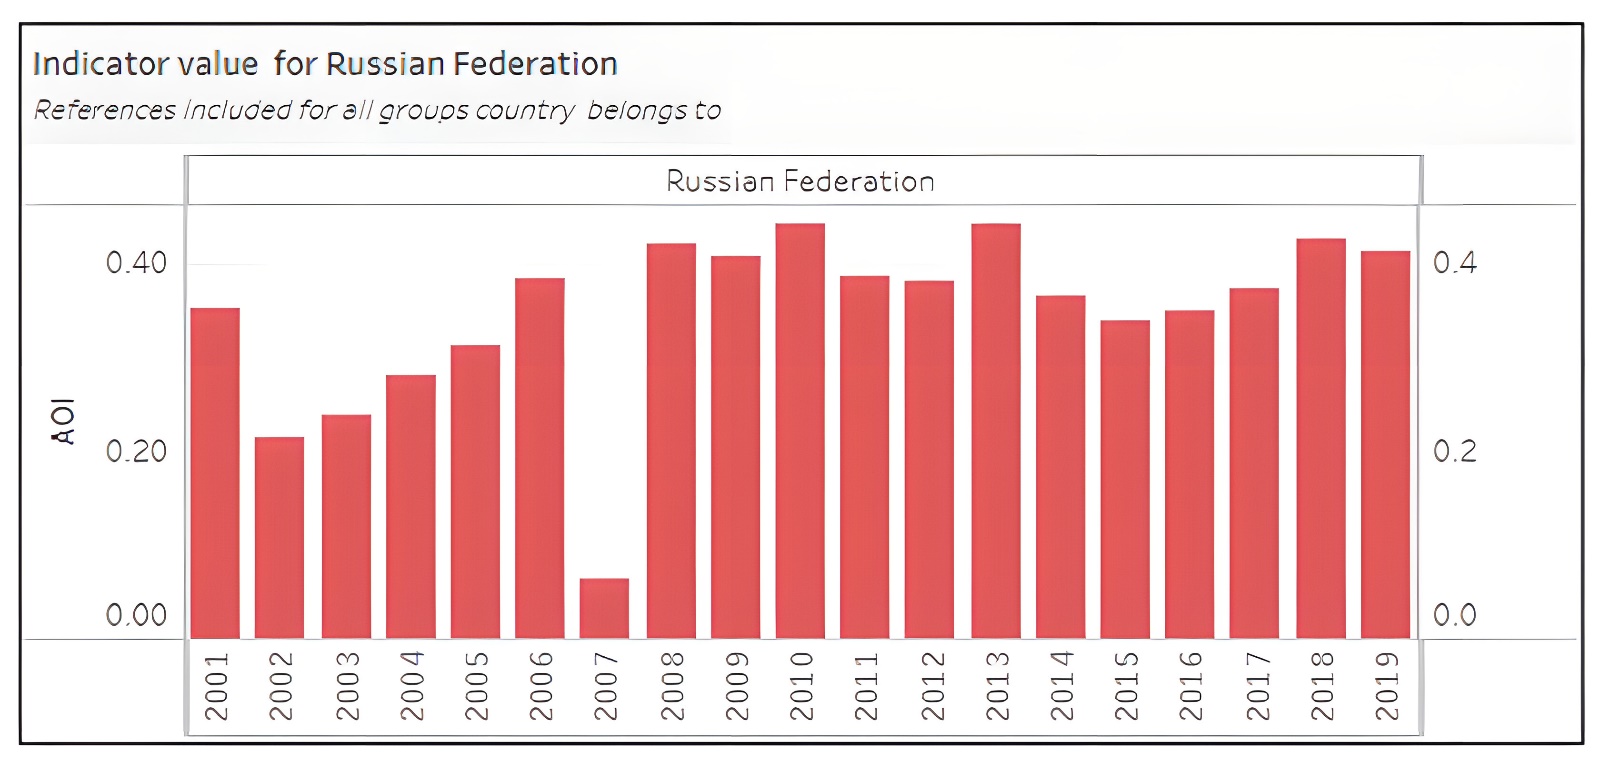 The value of the indicator of government spending on agriculture for the Russian Federation